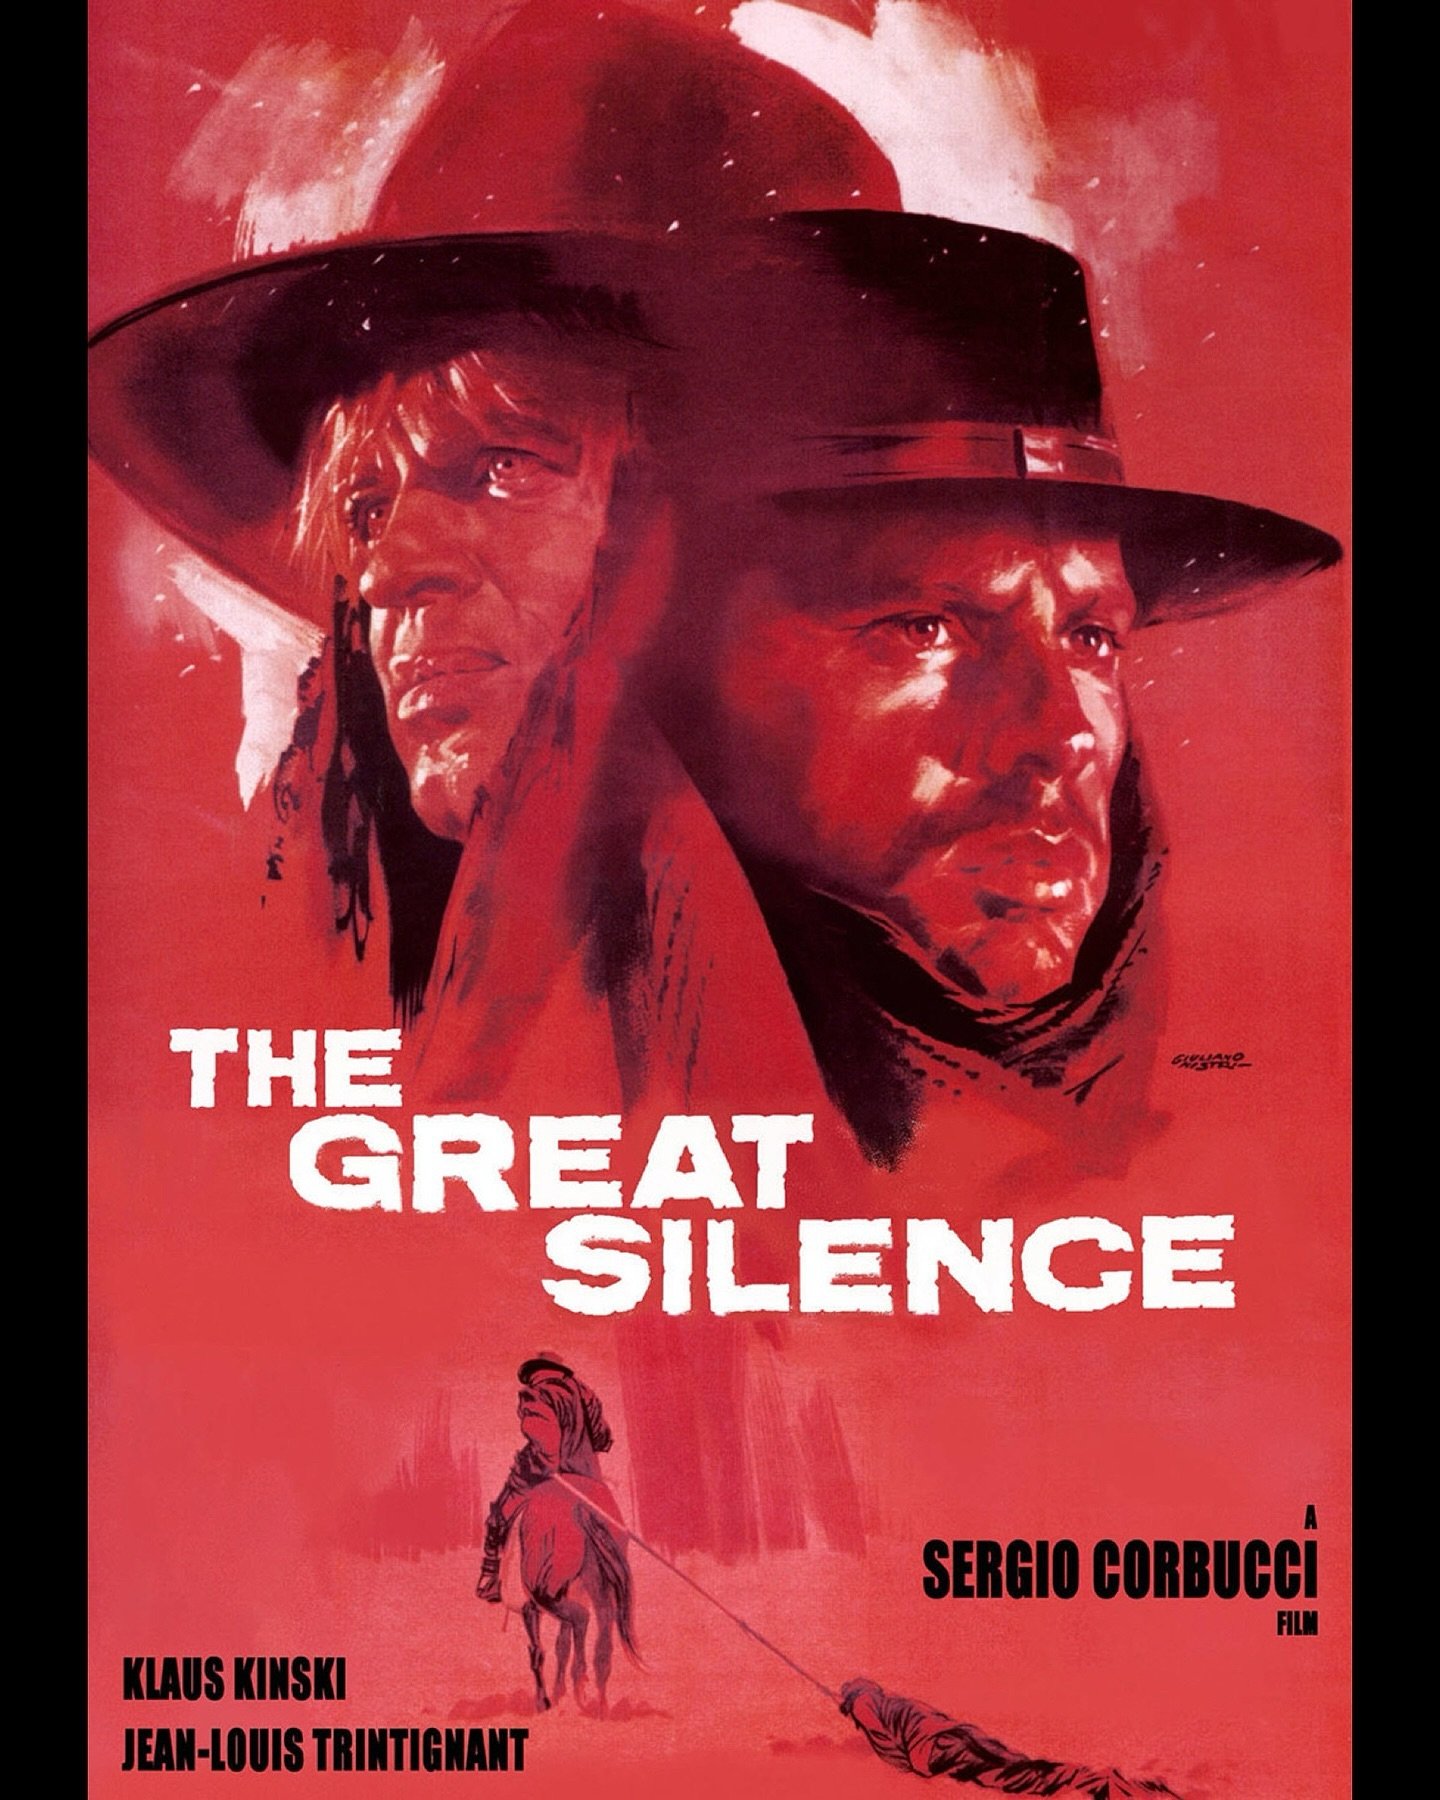 This week we review THE GREAT SILENCE (1968) starring Klaus Kinski! Listen now on Apple Podcasts, Spotify, and all major pod-apps!

www.podcastingafterdark.com/padepisodes/the-great-silence-1968-review
&mdash;&mdash;&mdash;&mdash;&mdash;&mdash;&mdash